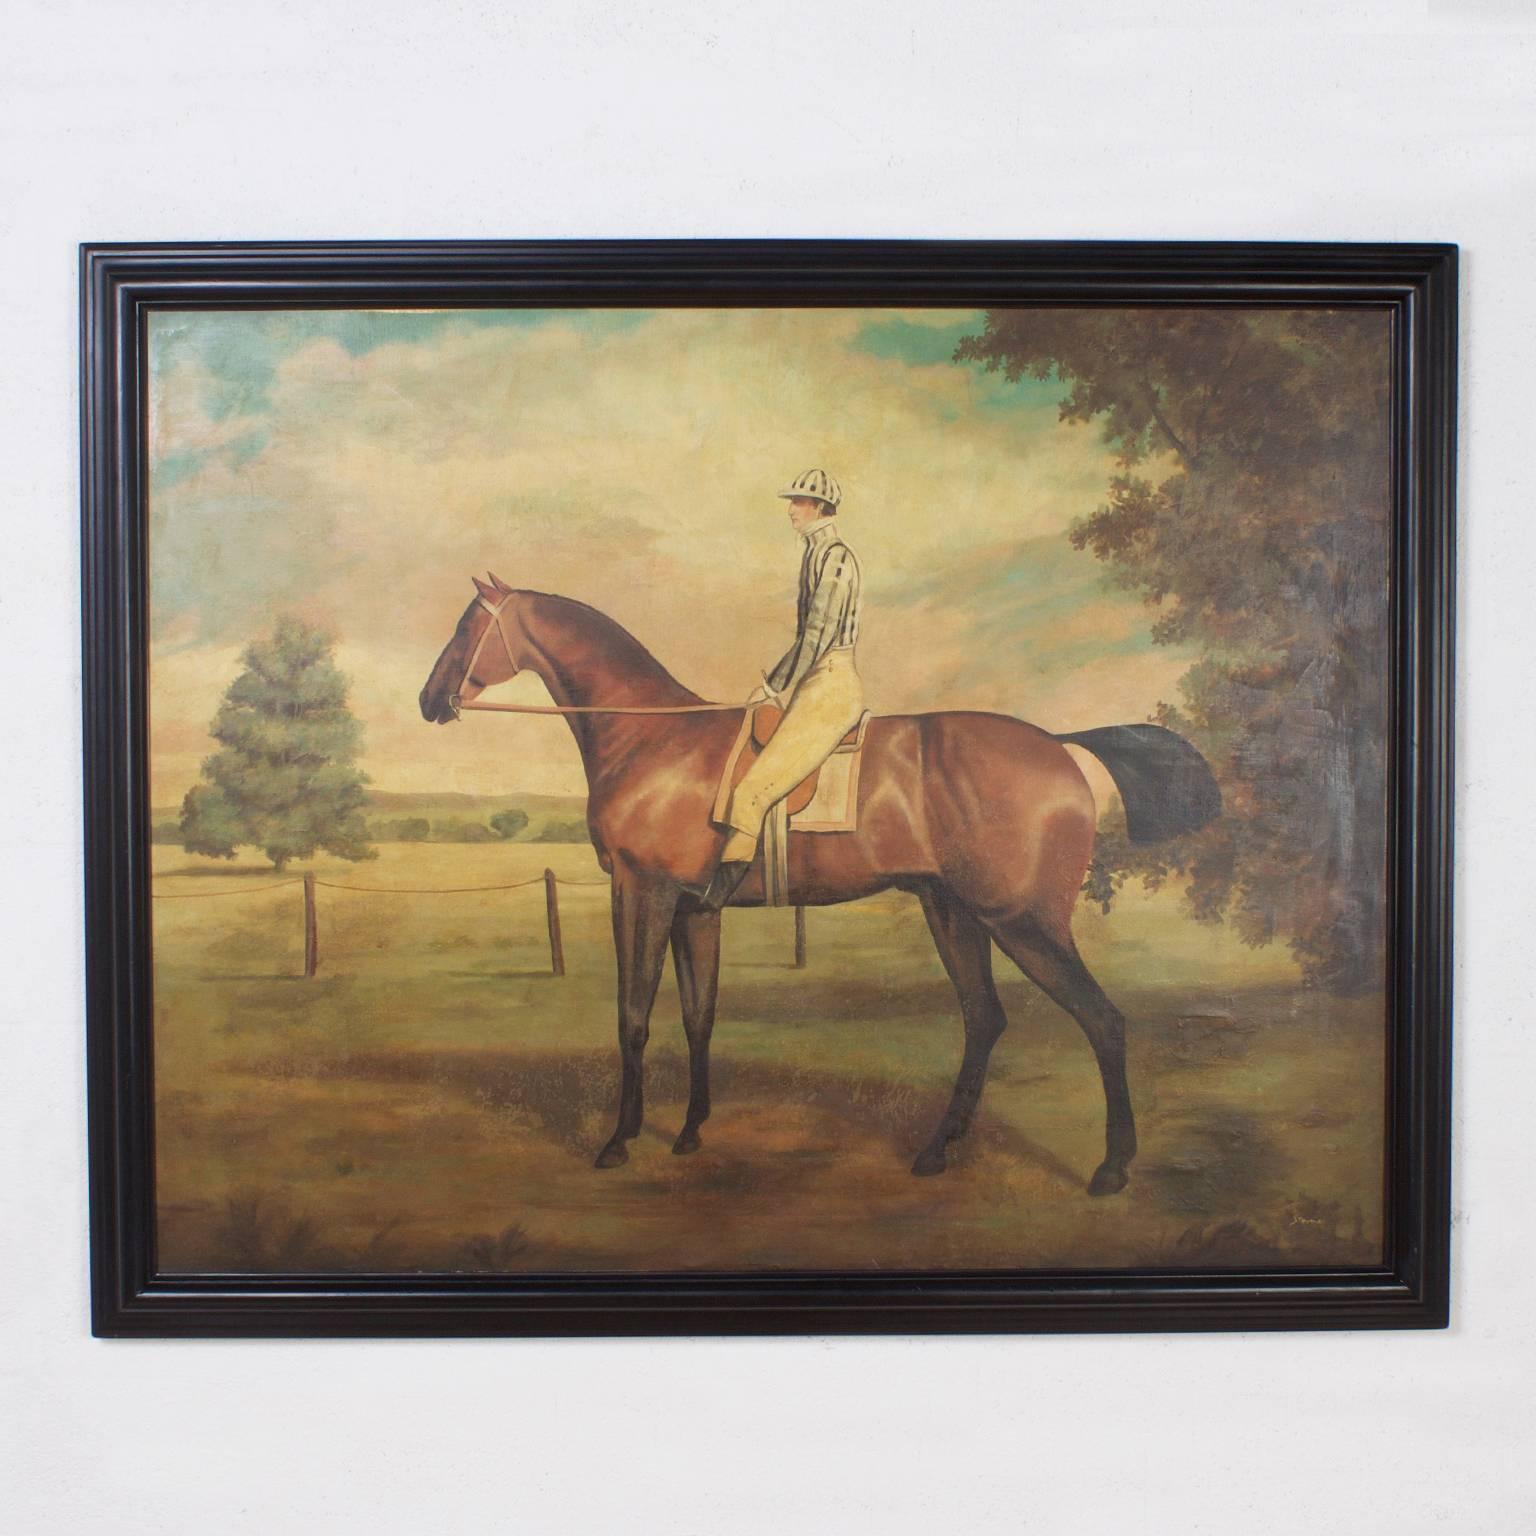 Large vintage oil painting on canvas of a race horse and jockey in a pastoral scene in the original ebonized frame, signed Stevens, on the lower right. Big, bold and straight to the point.

 